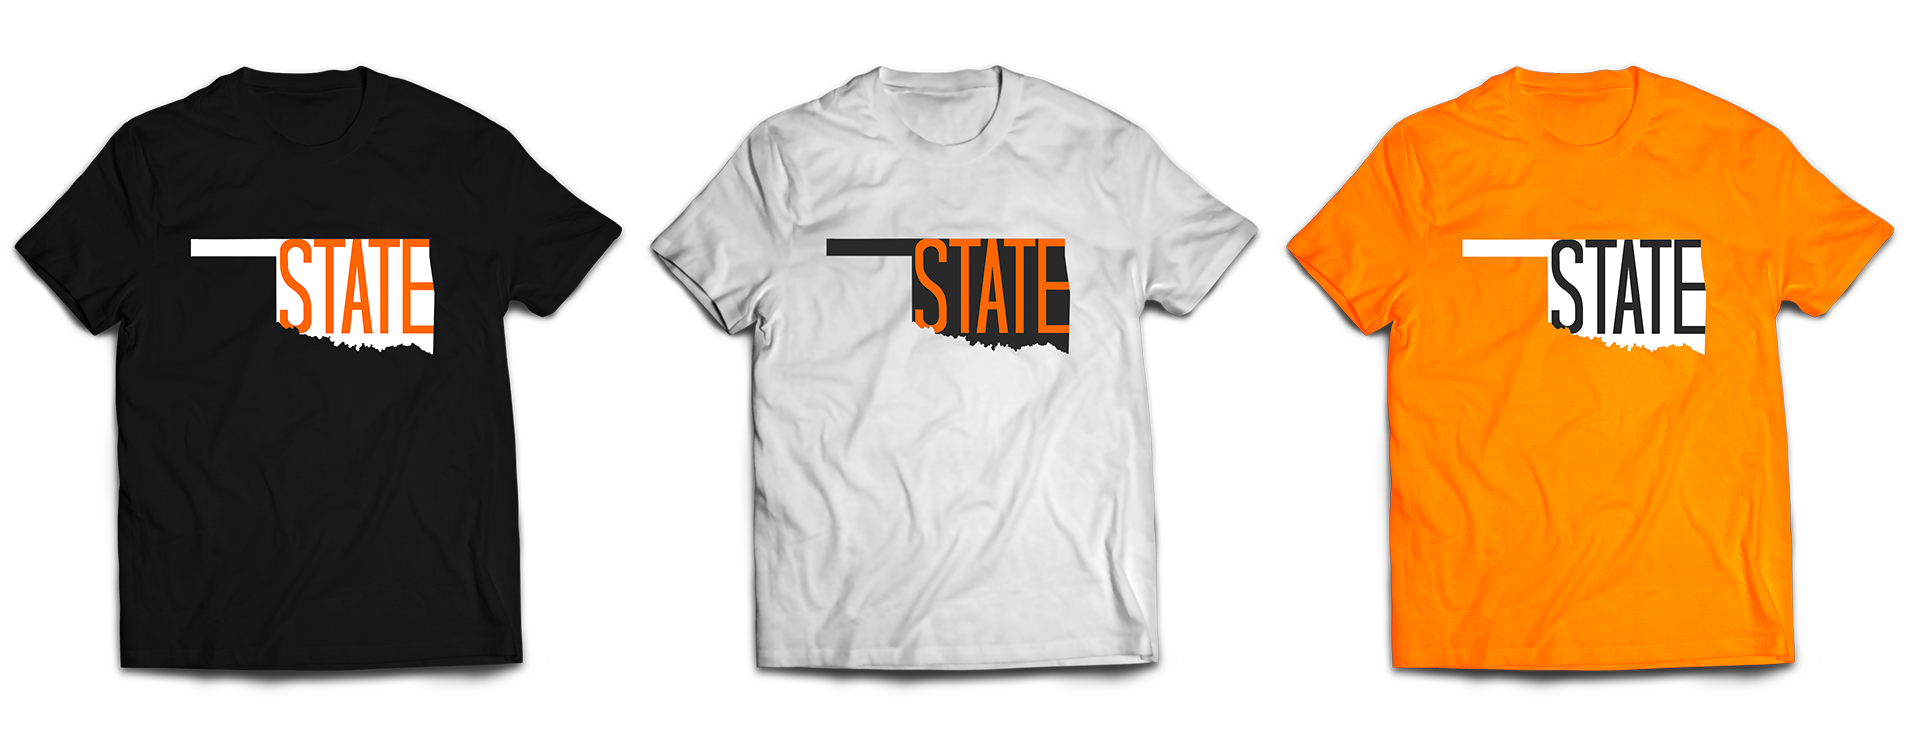 THE STATE T-SHIRT